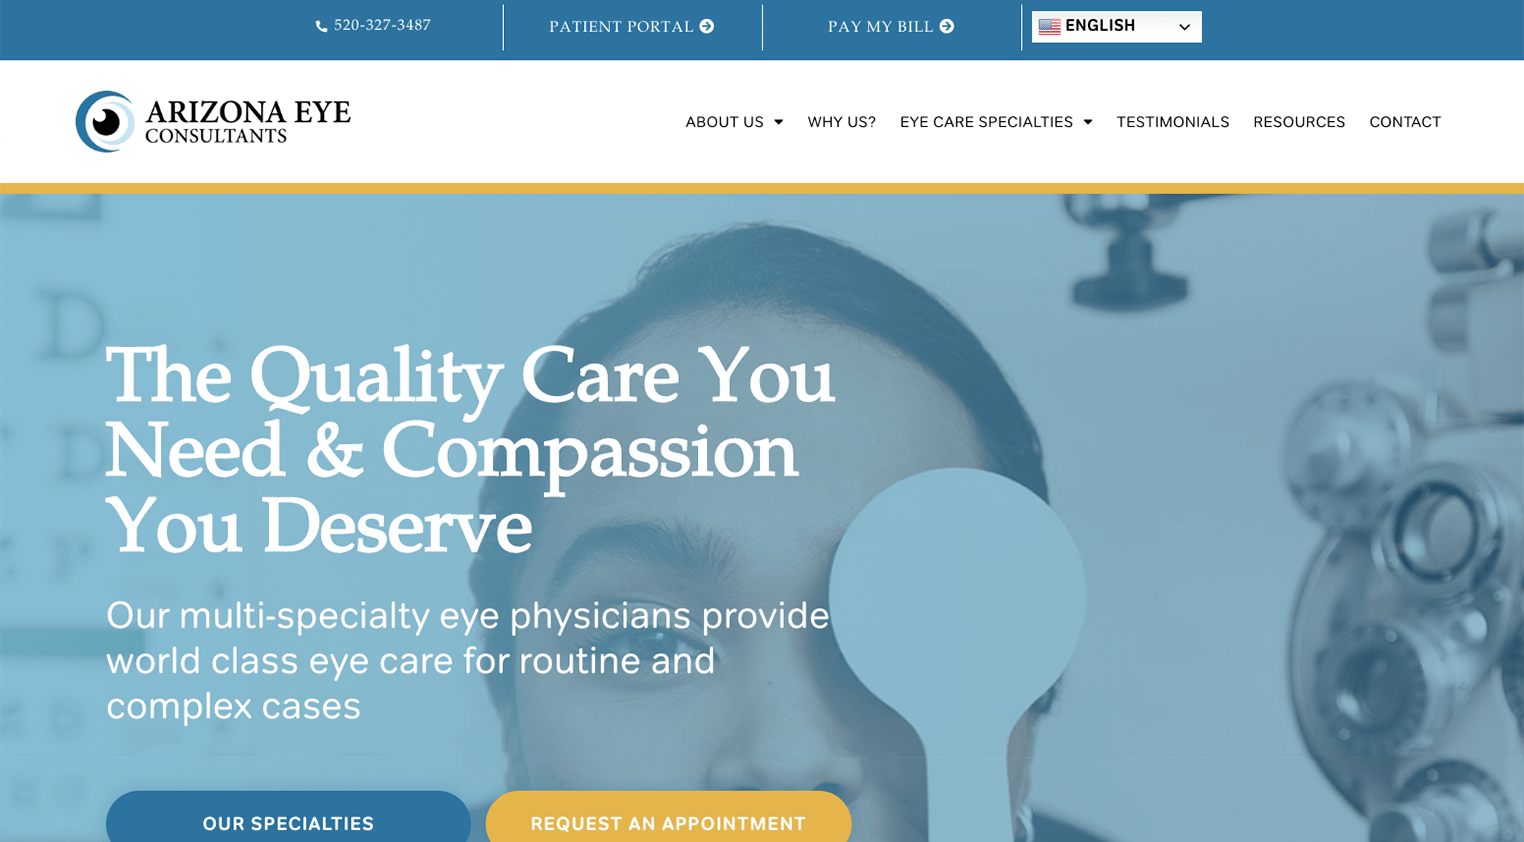 Newly designed website for Arizona Eye Consultants completed by Anchor Wave